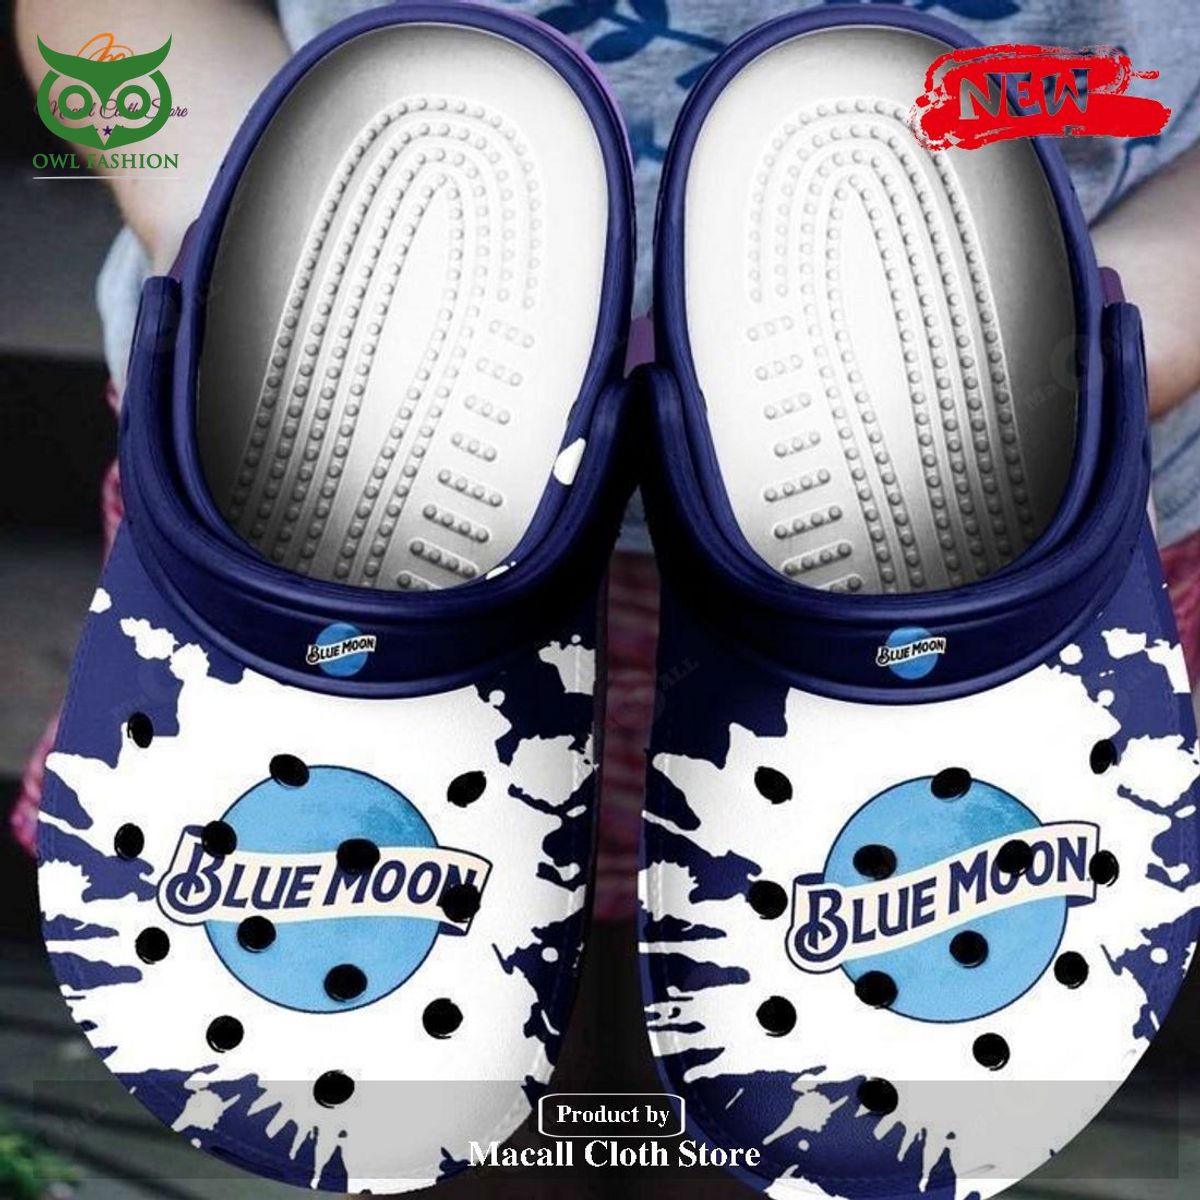 Blue Moon Beer Rubber Brand Crocs Clog You look so healthy and fit